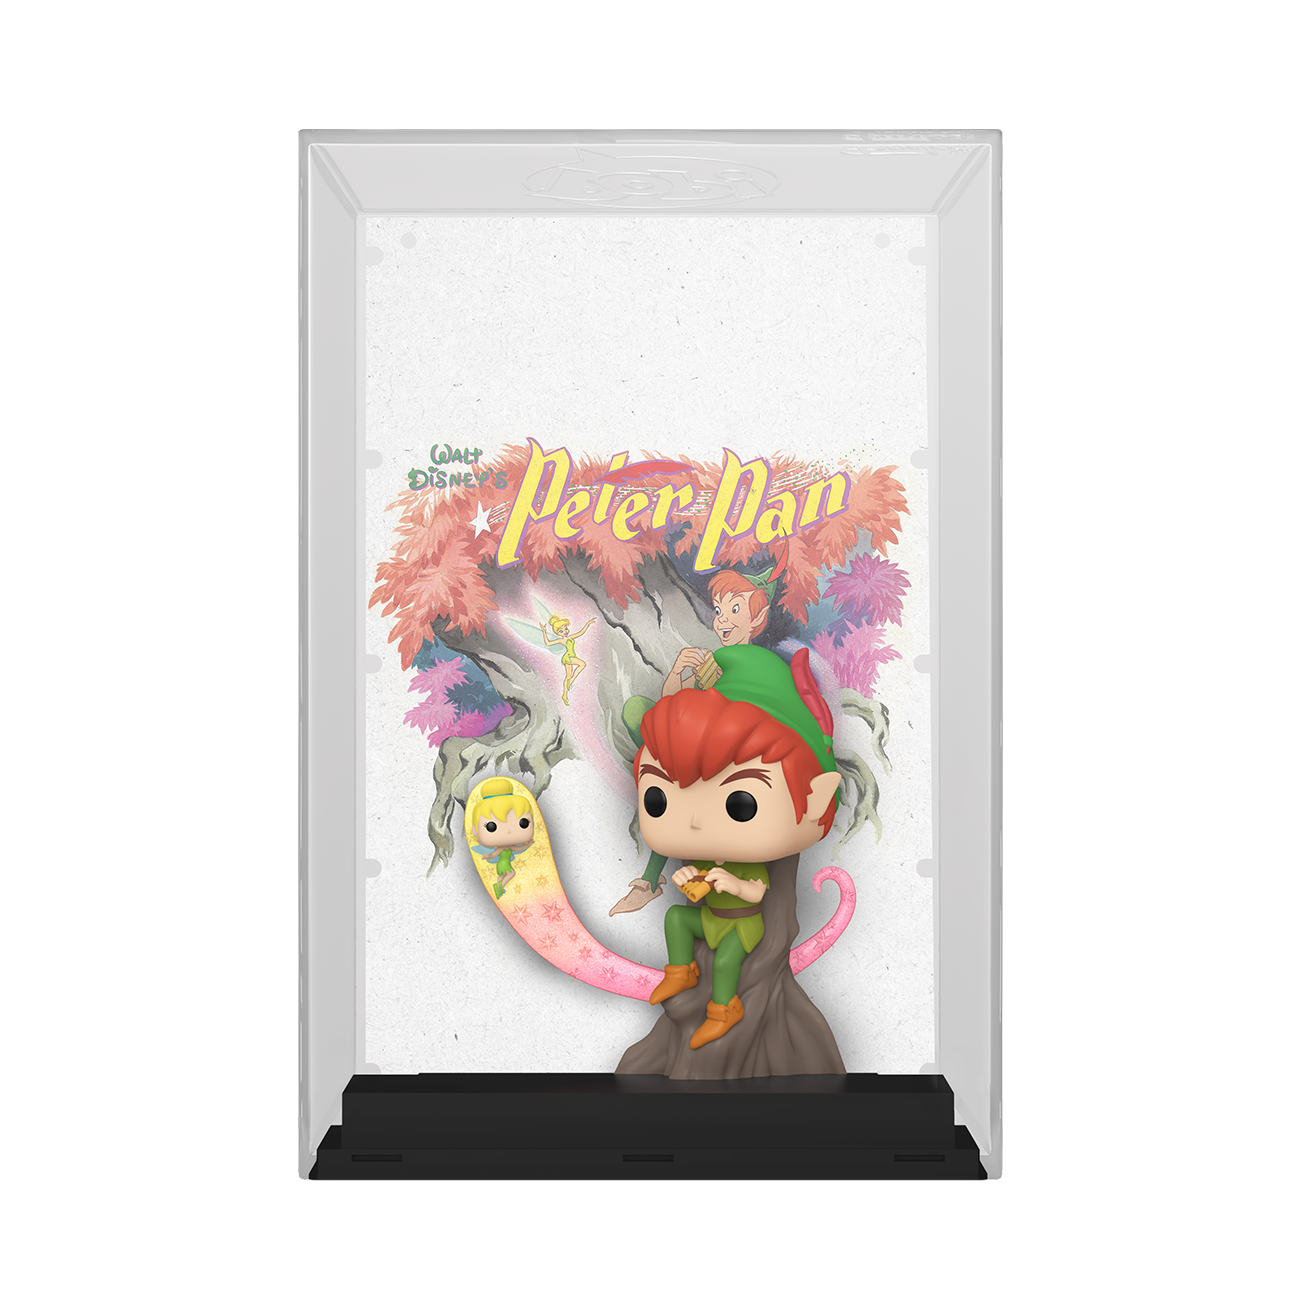 Photos - Action Figures / Transformers Funko Peter Pan And Tinker Bell - Peter Pan Pop! Movie Poster 